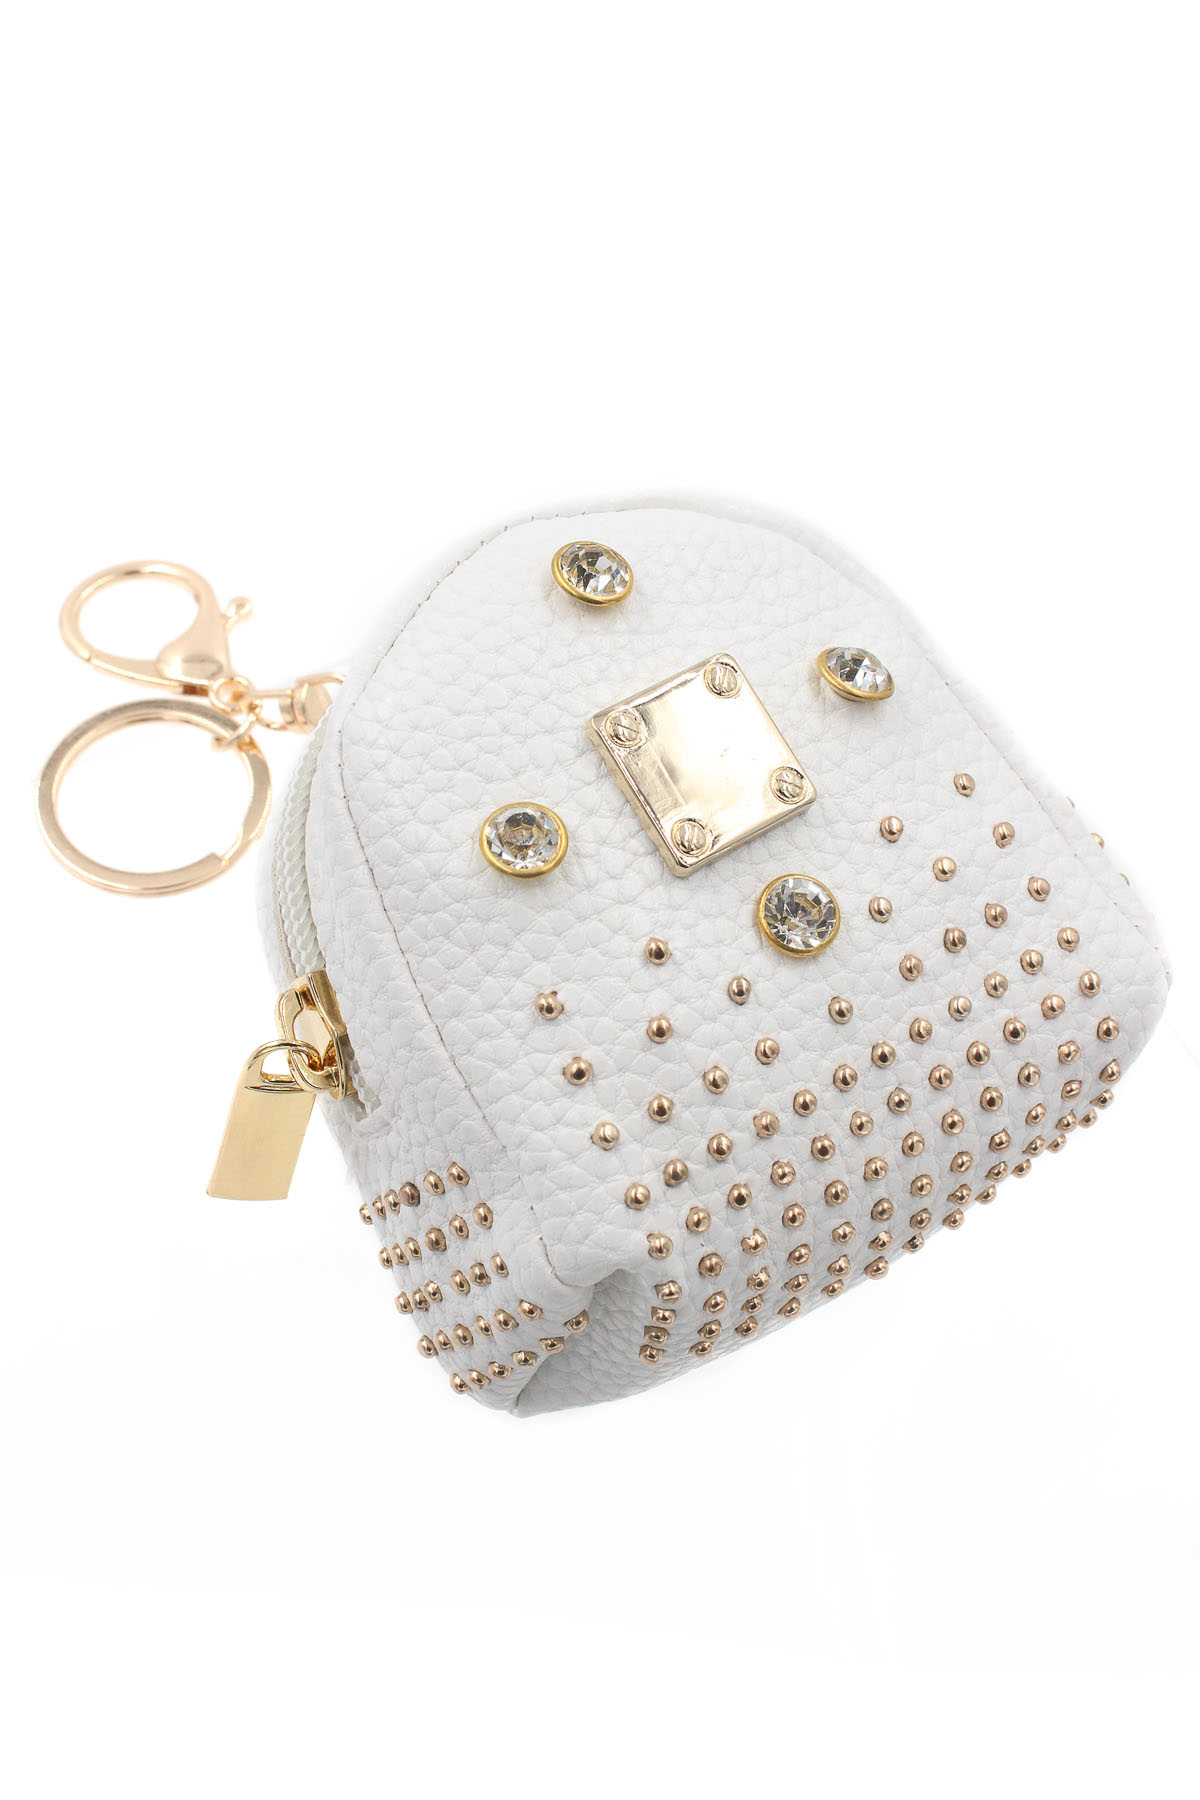 Studded Backpack Coin Purse/Key Chain - Key Chains